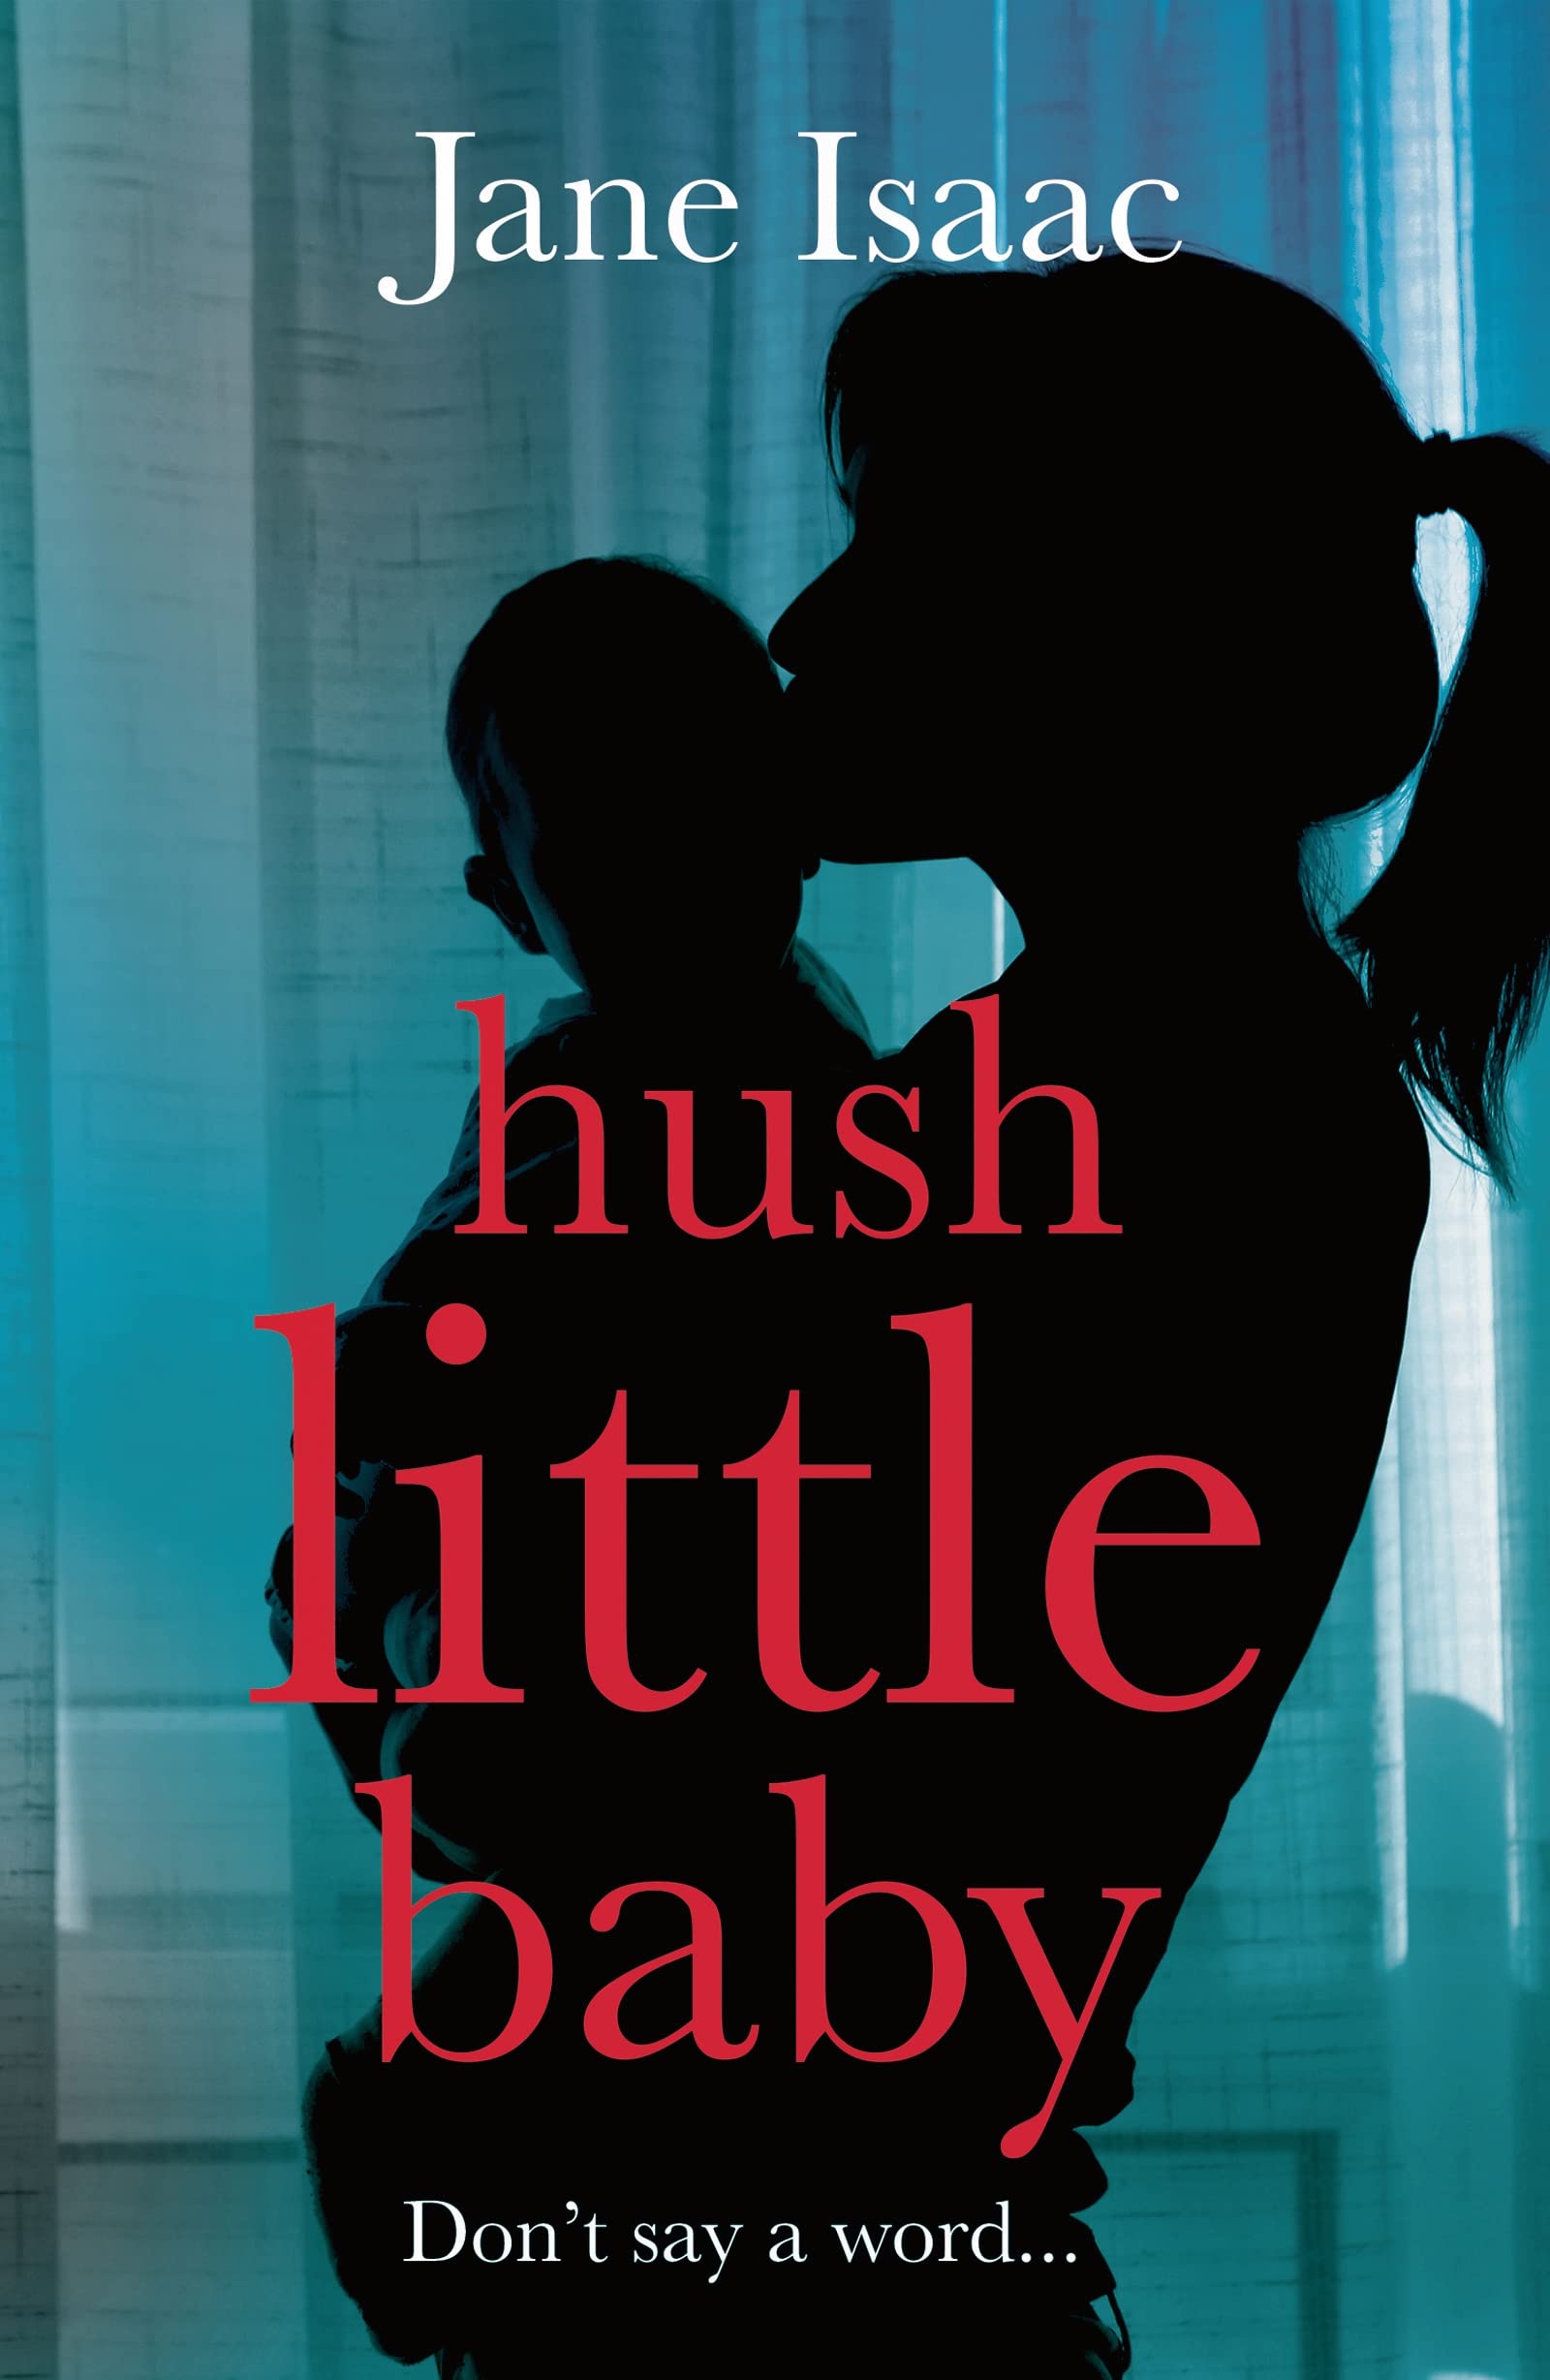 Hush Little Baby: the electrifying new domestic crime thriller (DC Beth Chamberlain Book 3)